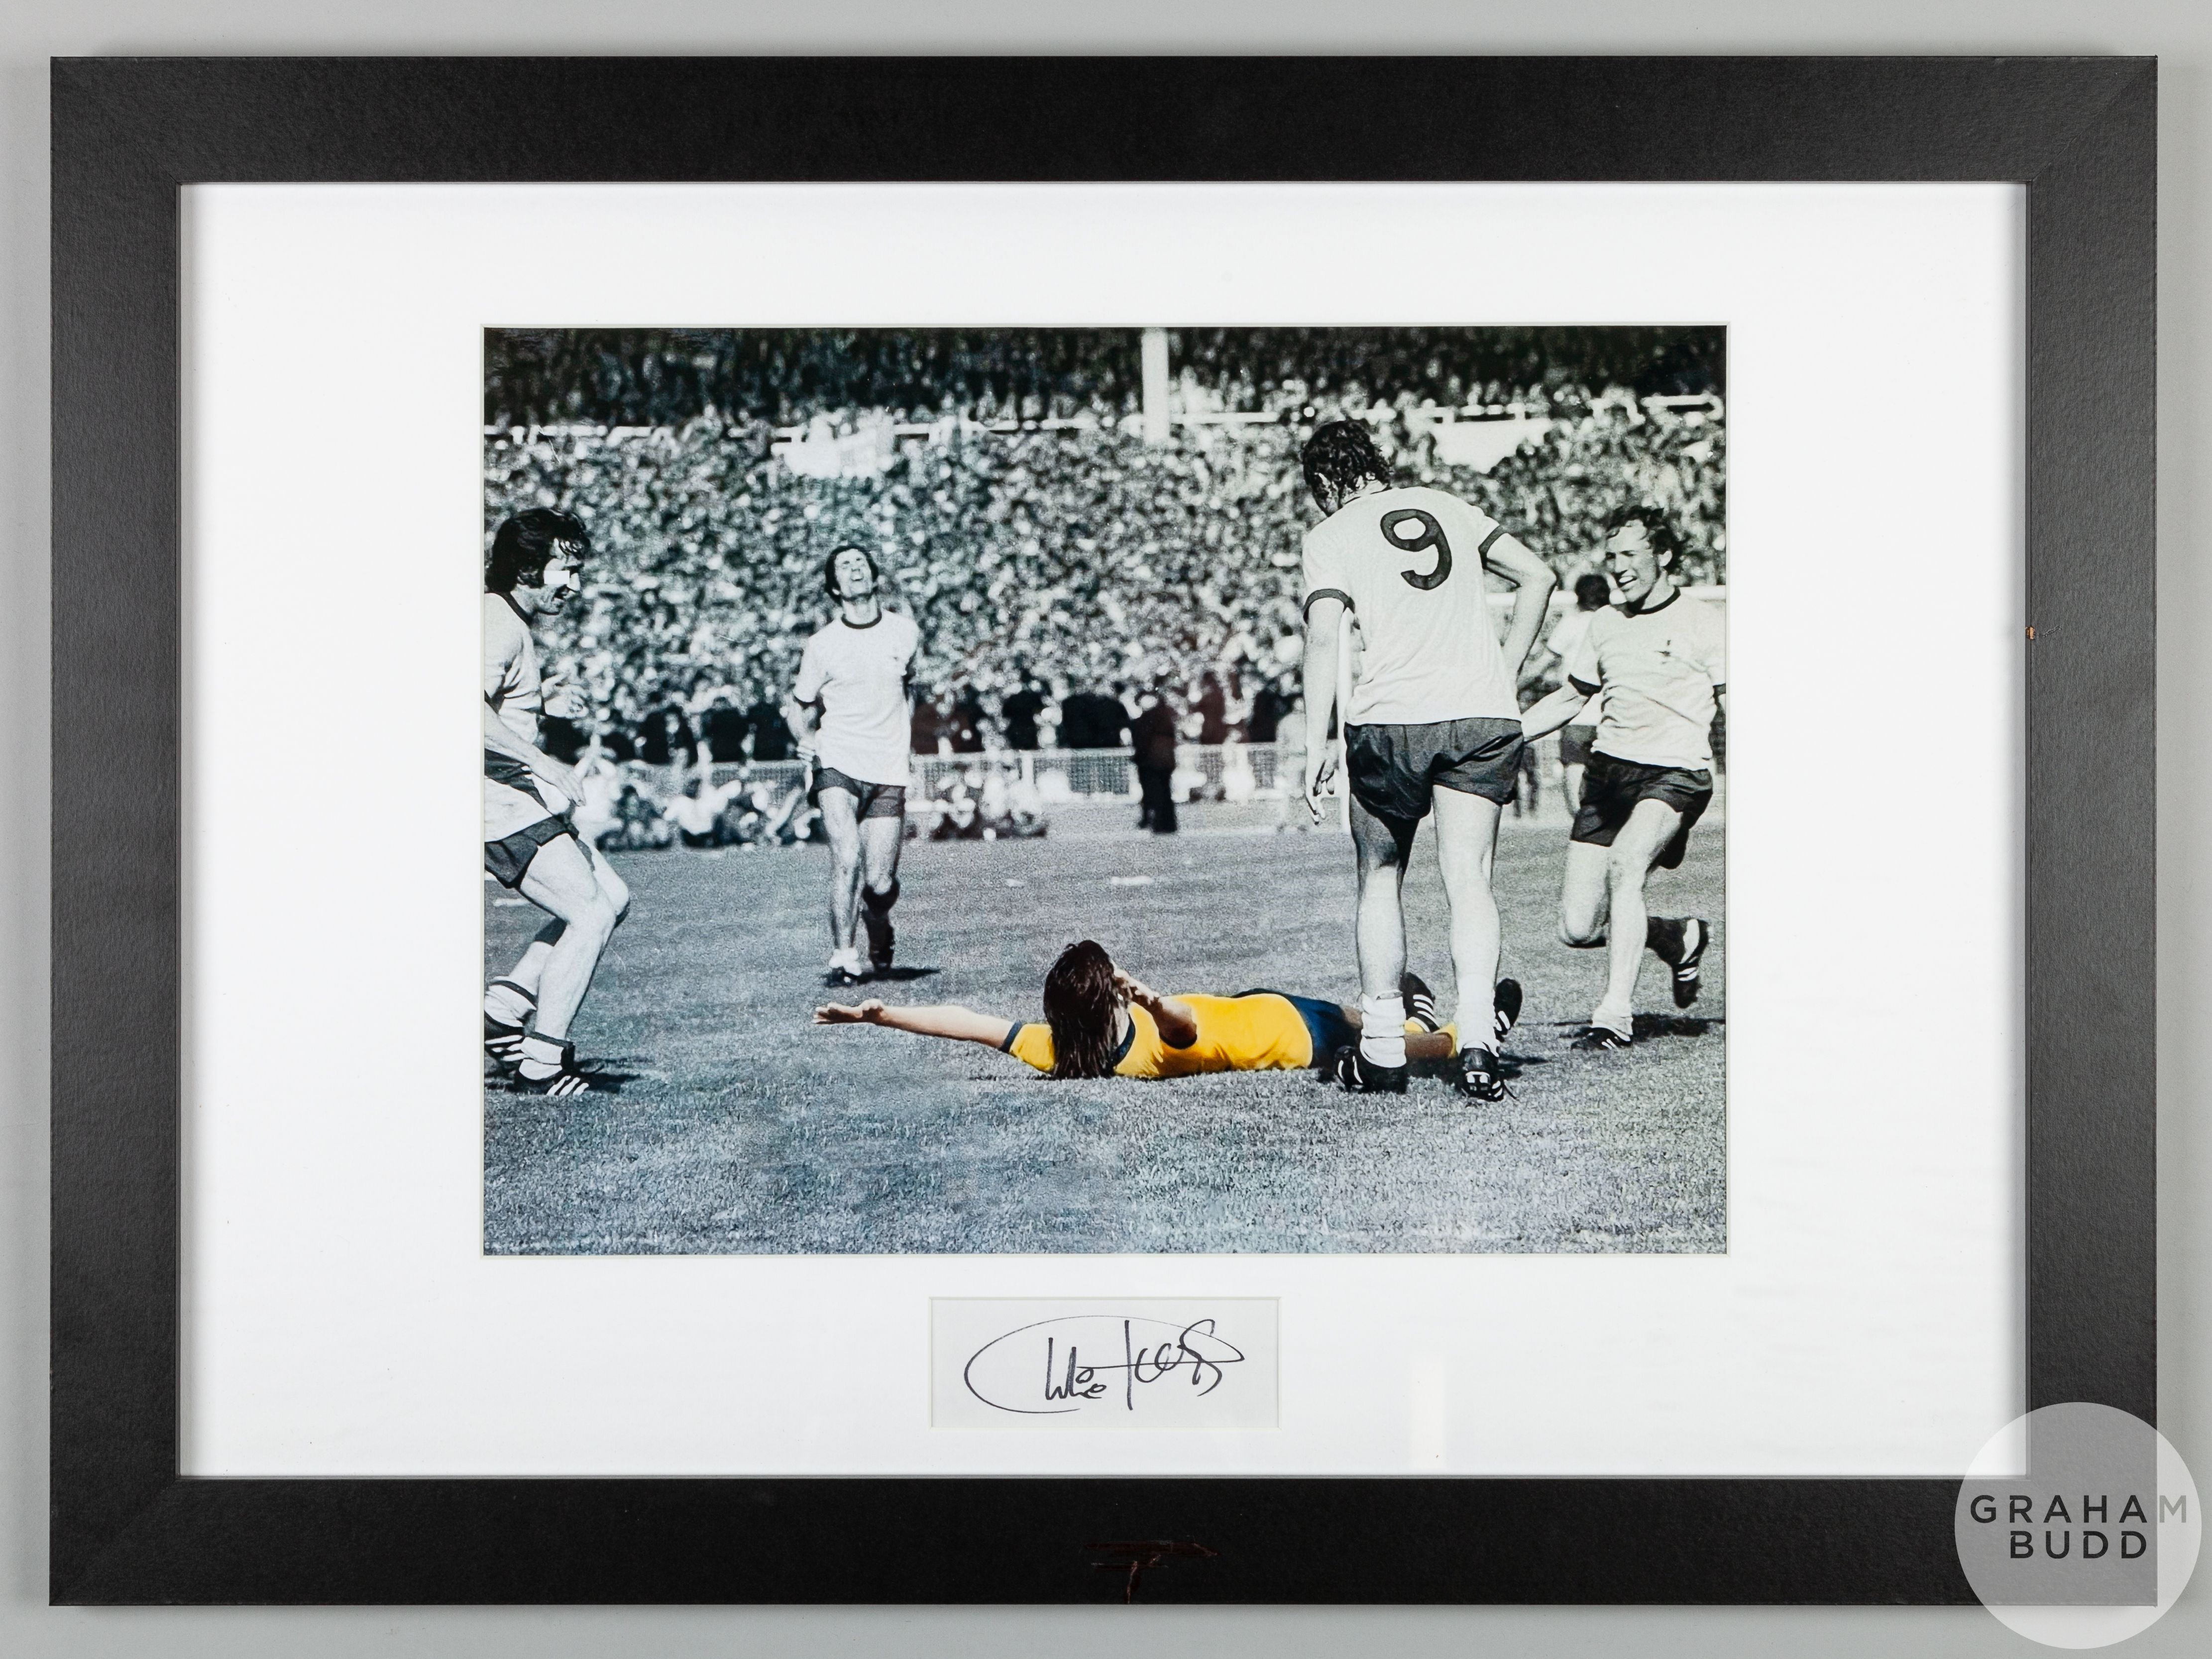 Charlie George signed Arsenal 1971 F.A. Cup winning goalscorer framed photographic display,